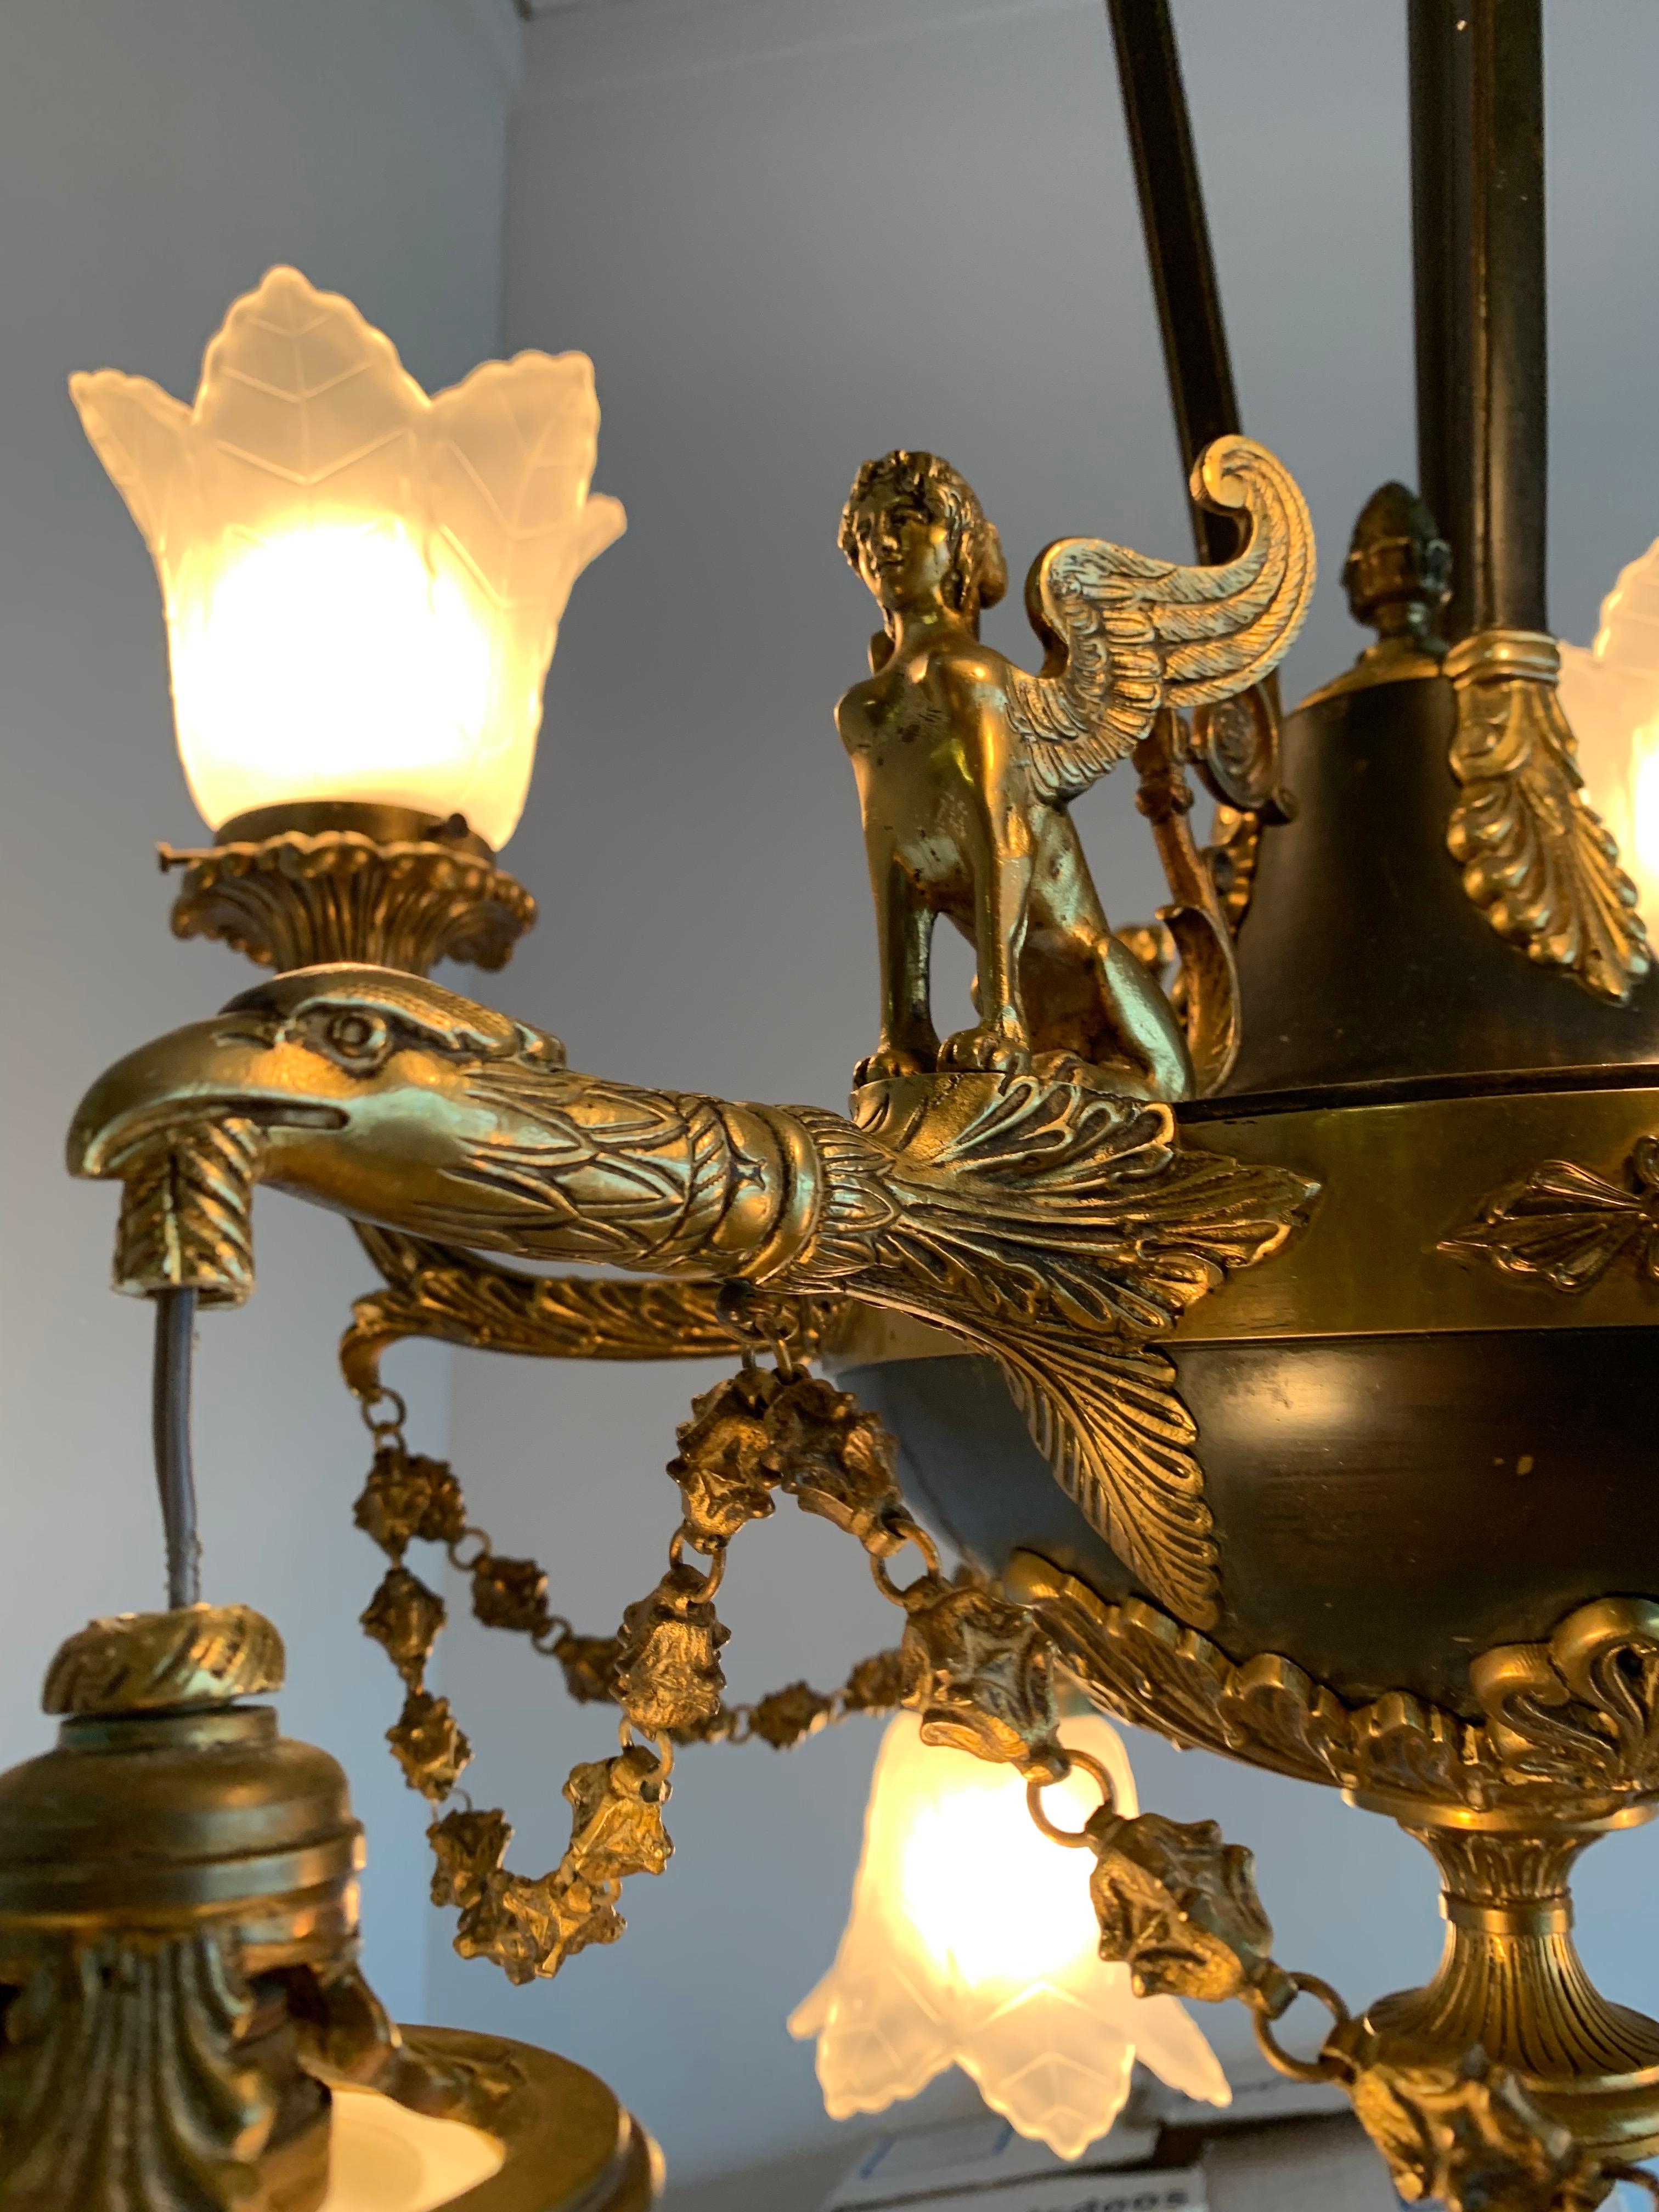 Antique French Empire Style Gilt Bronze Chandelier with Sphinx & Eagle Sculpture 2